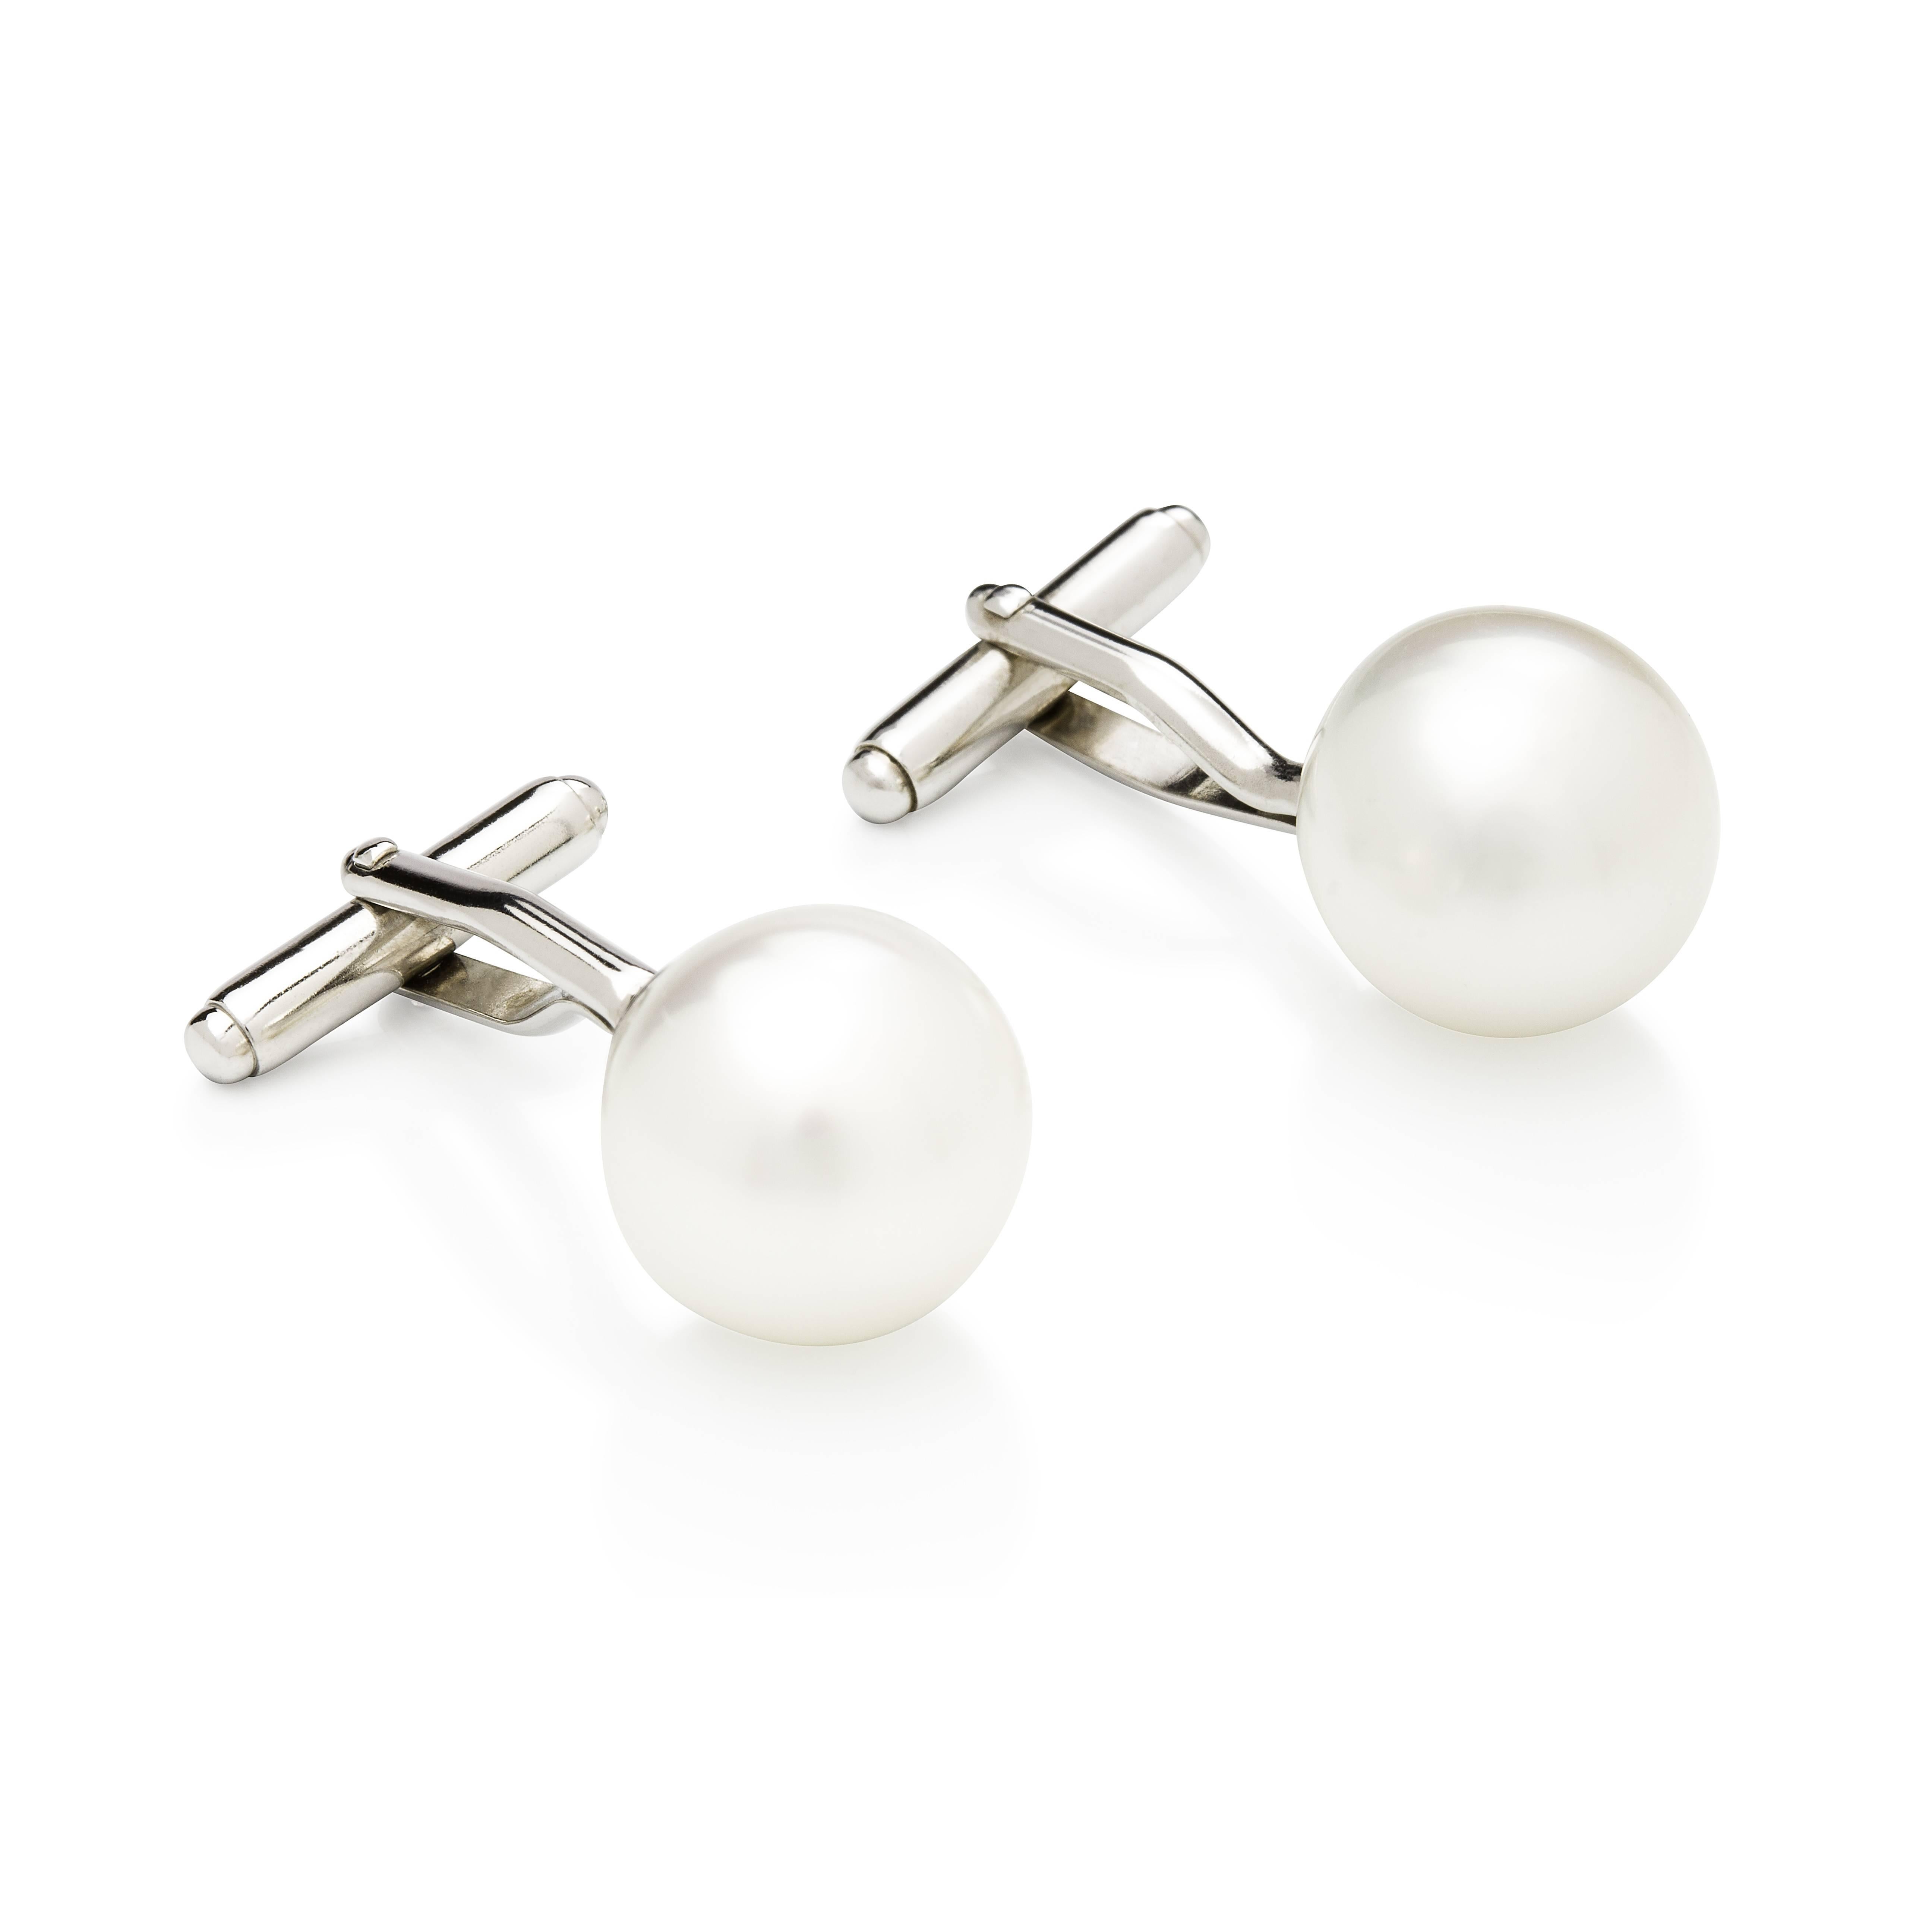 Style for Men...

18 carat white gold cuff-links with 12-13 mm, button shape, high quality (no blemishes or marks), high luster, white color, Australian South Sea pearls.

Button shaped pearls are perfect for cuff-links so they sit just right with